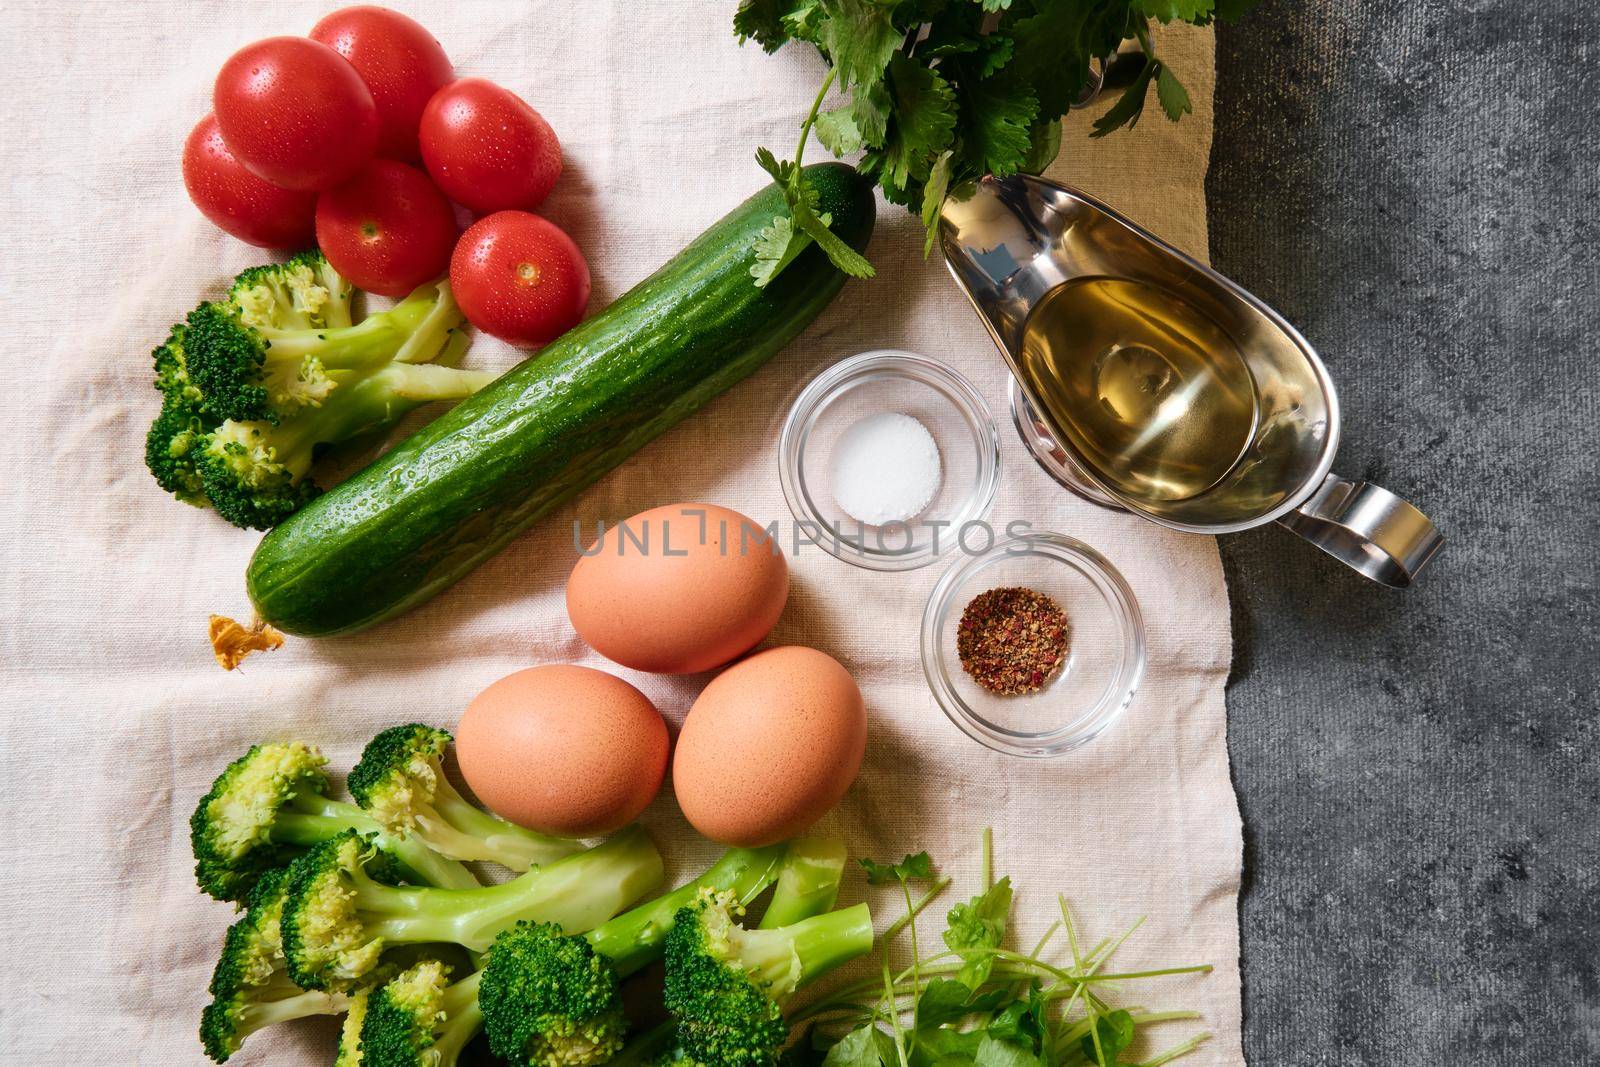 Tomatoes, cucumbers, eggs, cabbage, spices and herbs